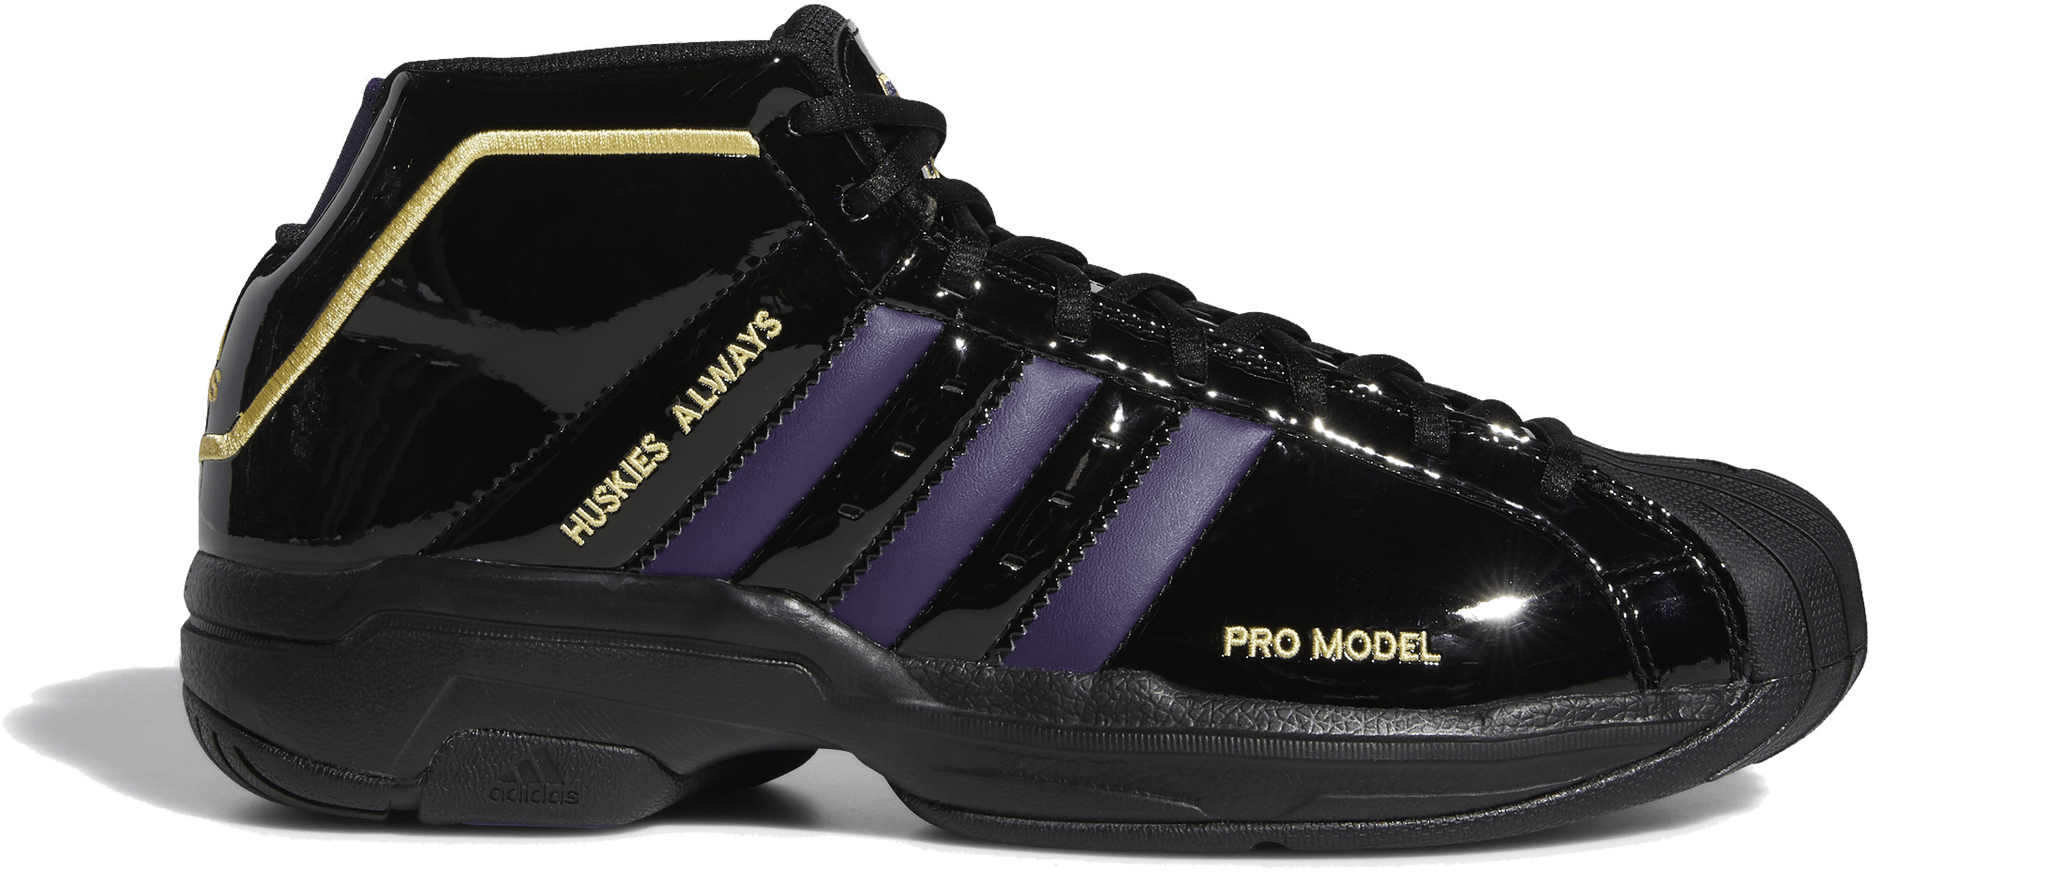 Adidas Pro Model 2G Colorways - 19 Styles Starting from $79.99